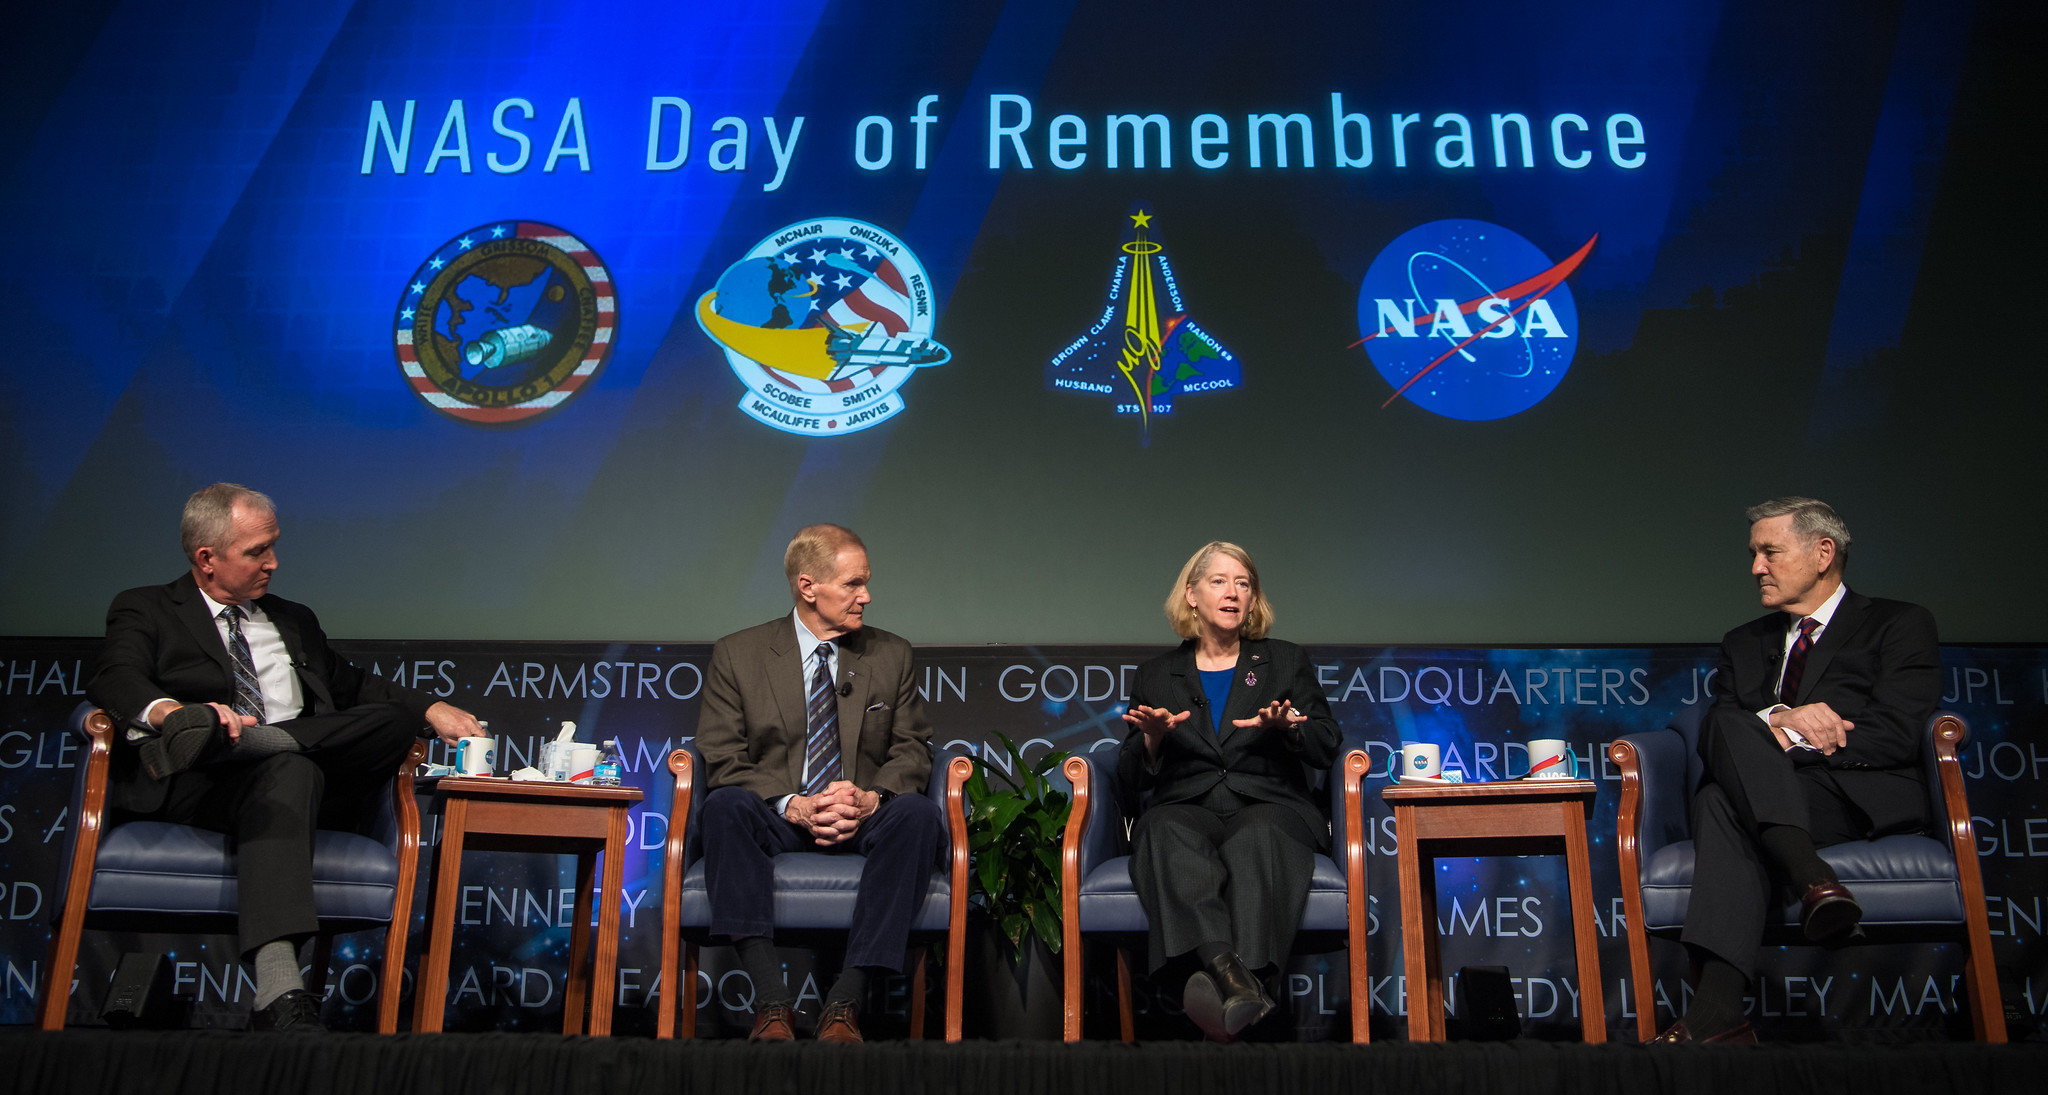 For NASA, a somber 'Day of Remembrance' casts spotlight on astronaut